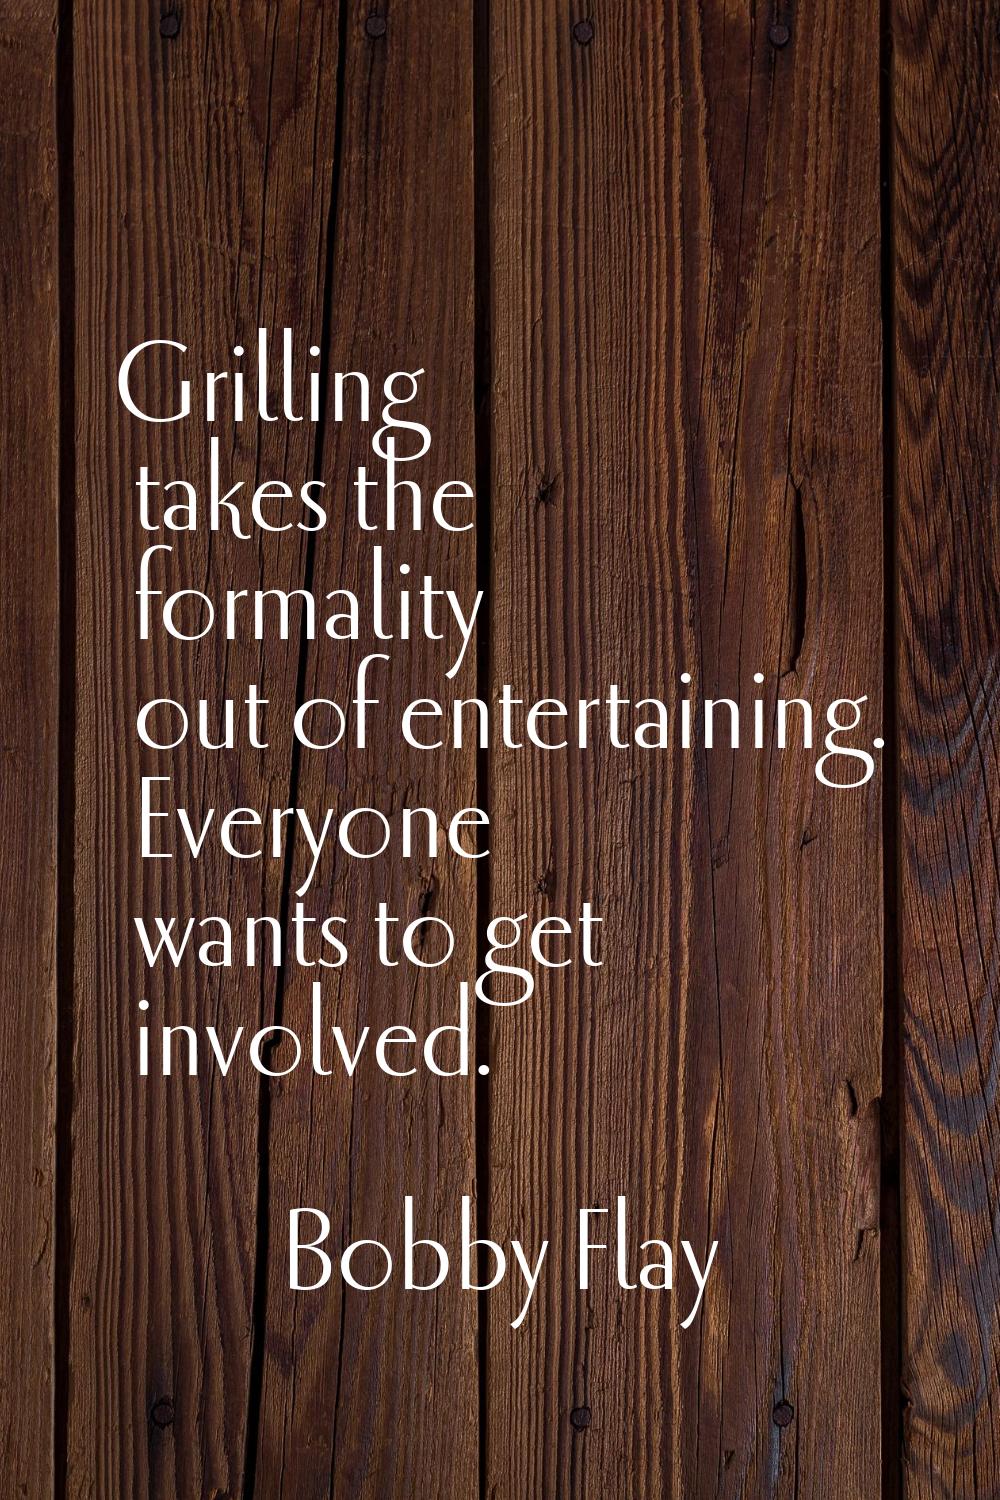 Grilling takes the formality out of entertaining. Everyone wants to get involved.